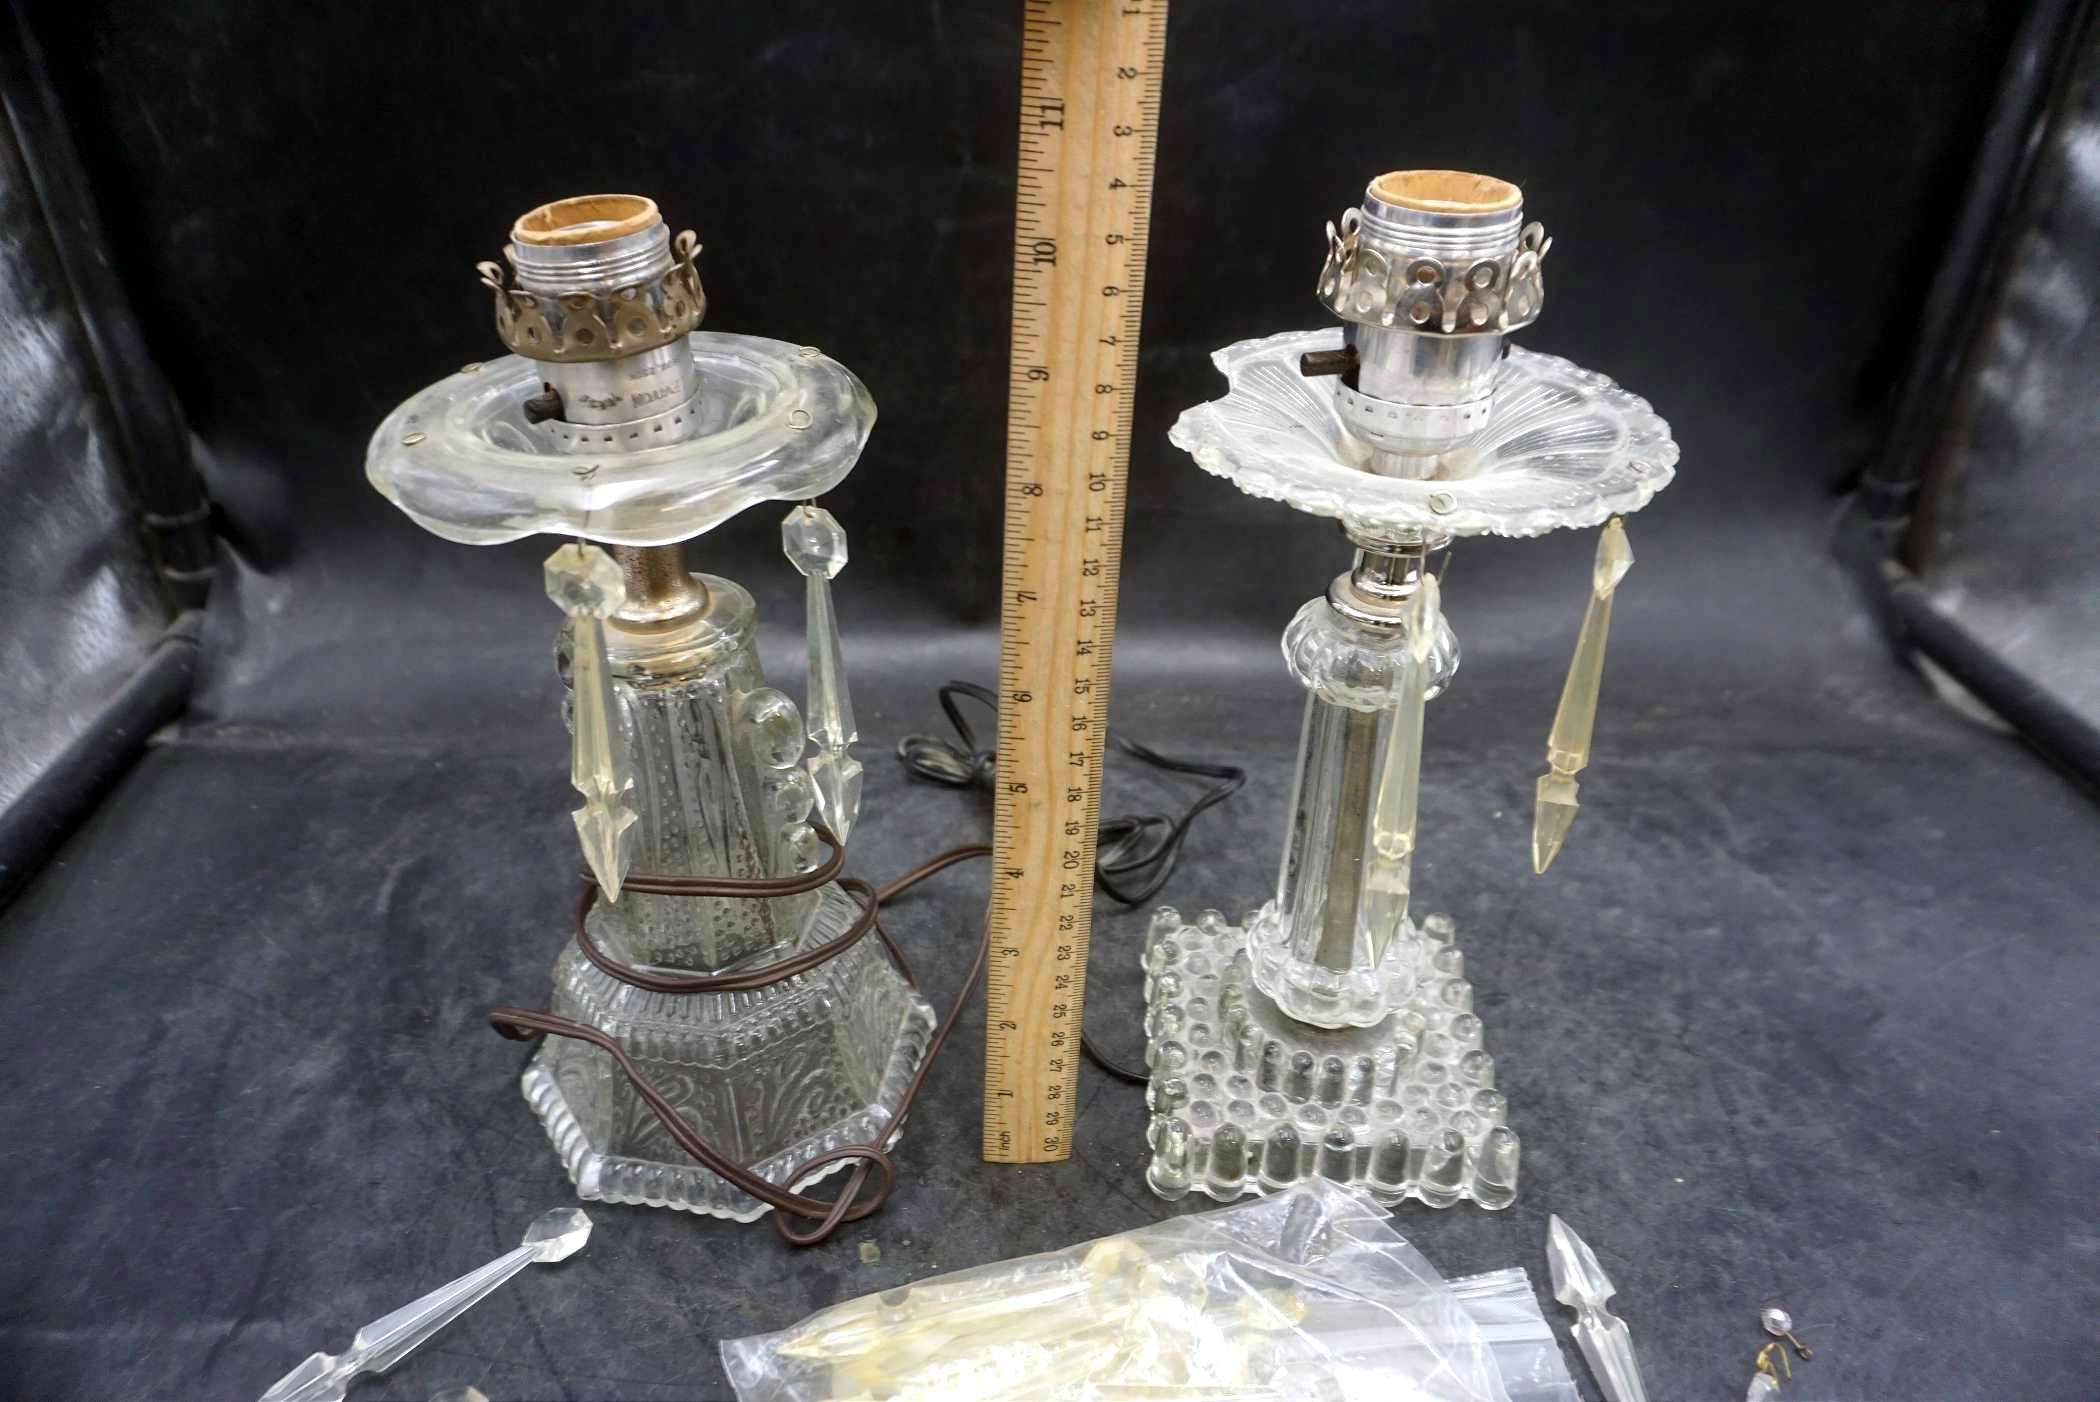 2 - Electric Glass W/ Hanging Crystals Lamp Base W/O Shades